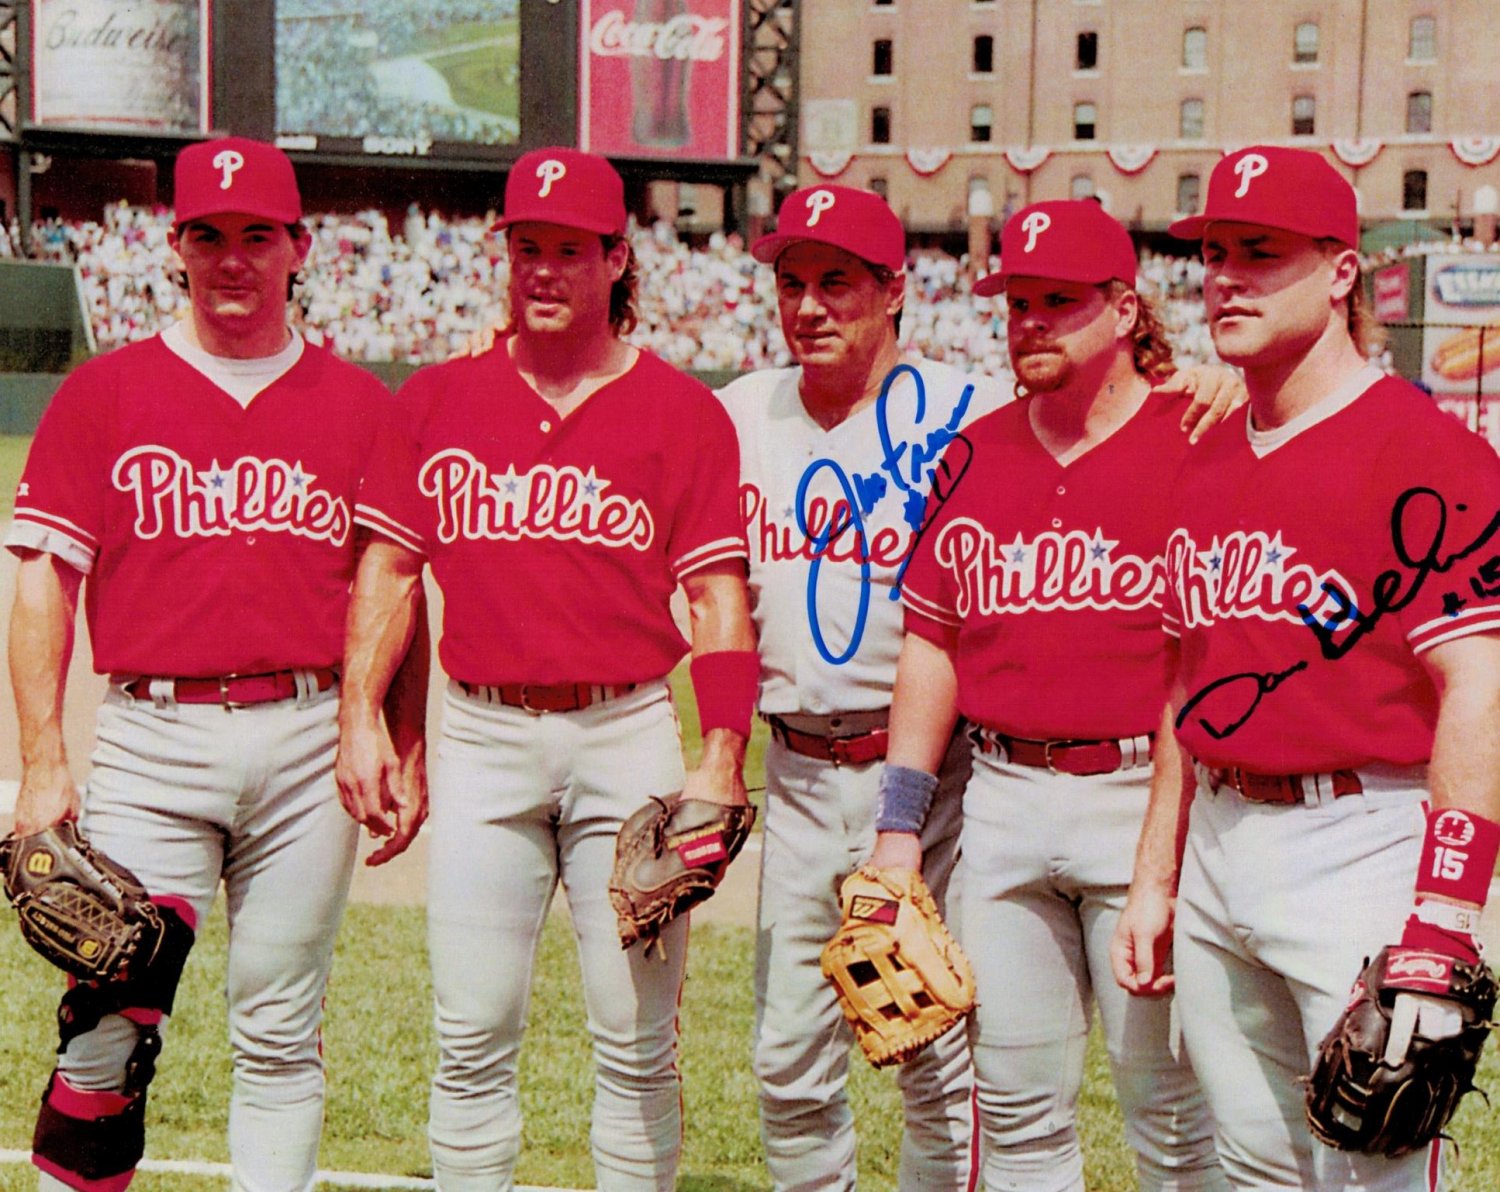 Jim Fregosi & Dave Hollins Philadelphia Phillies Autographed Signed 8x10  Photo - Certified Authentic